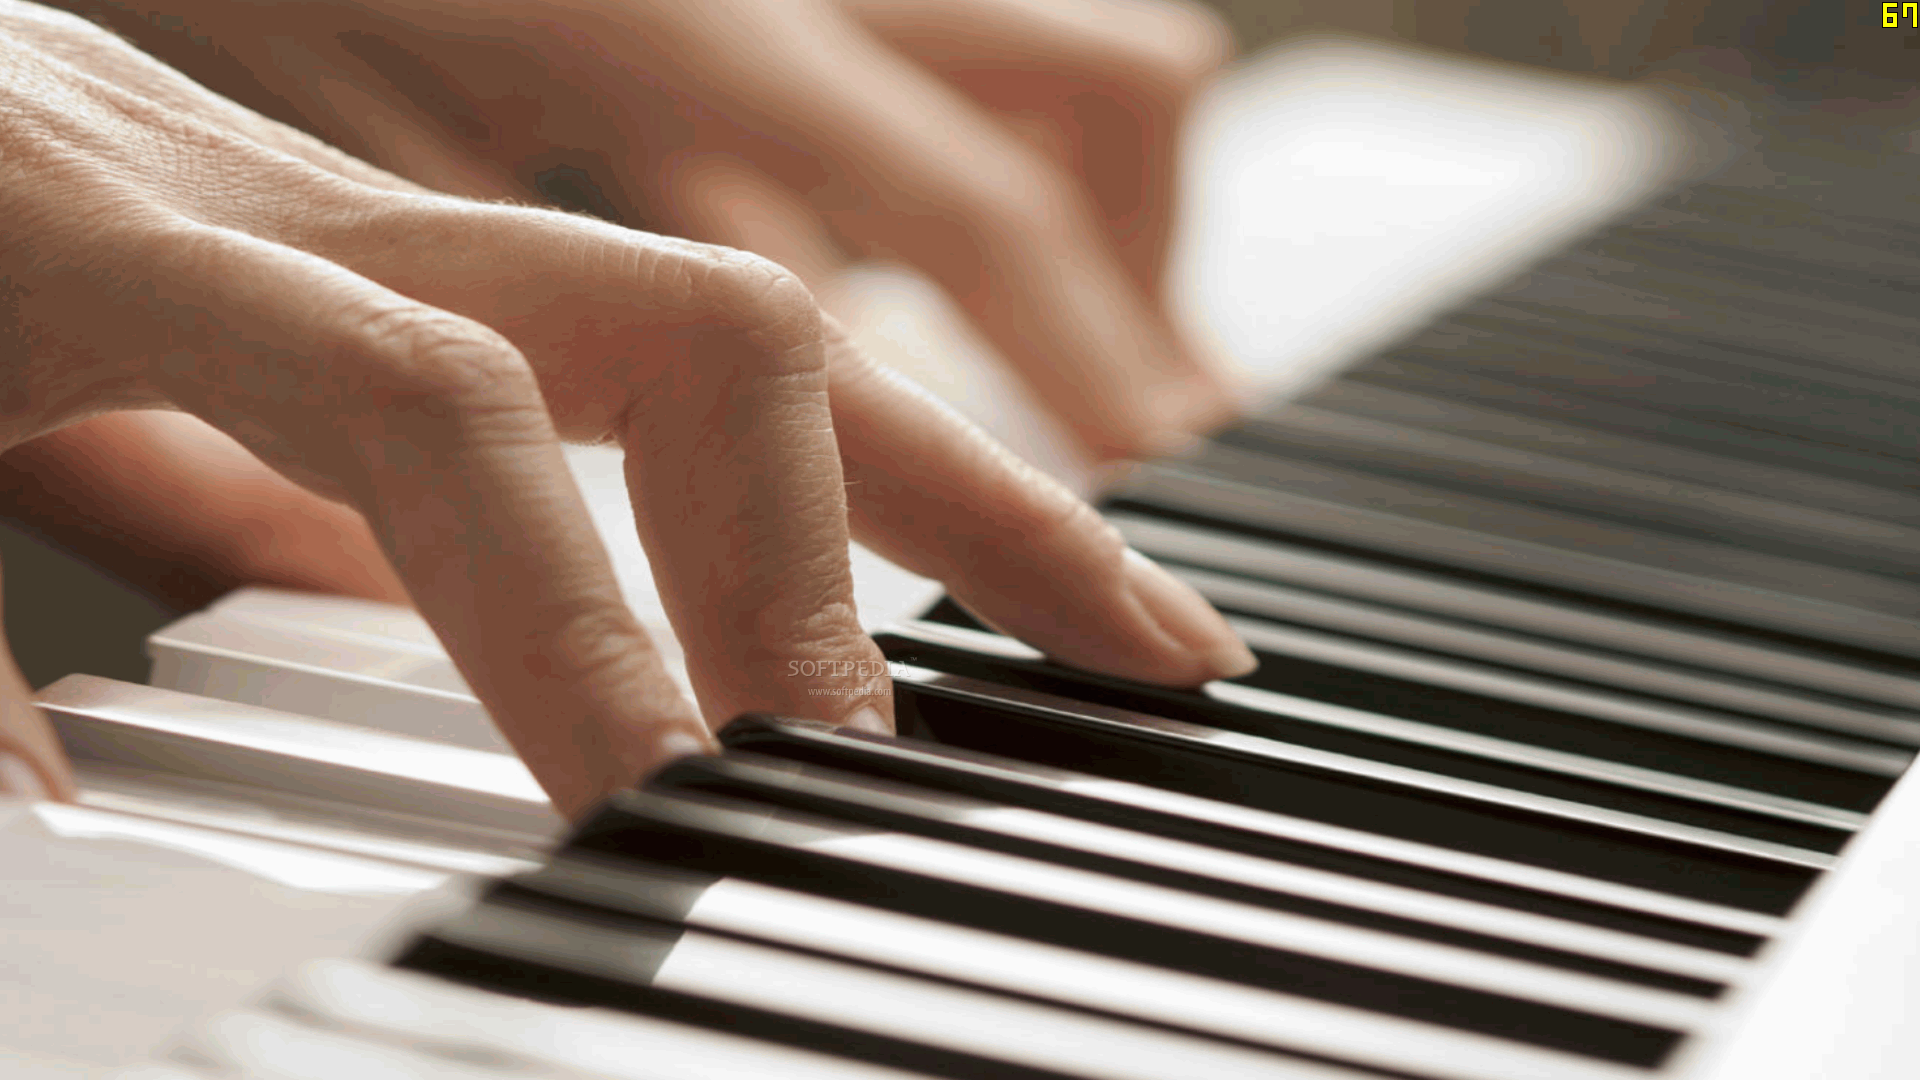 Learn the piano this holiday season